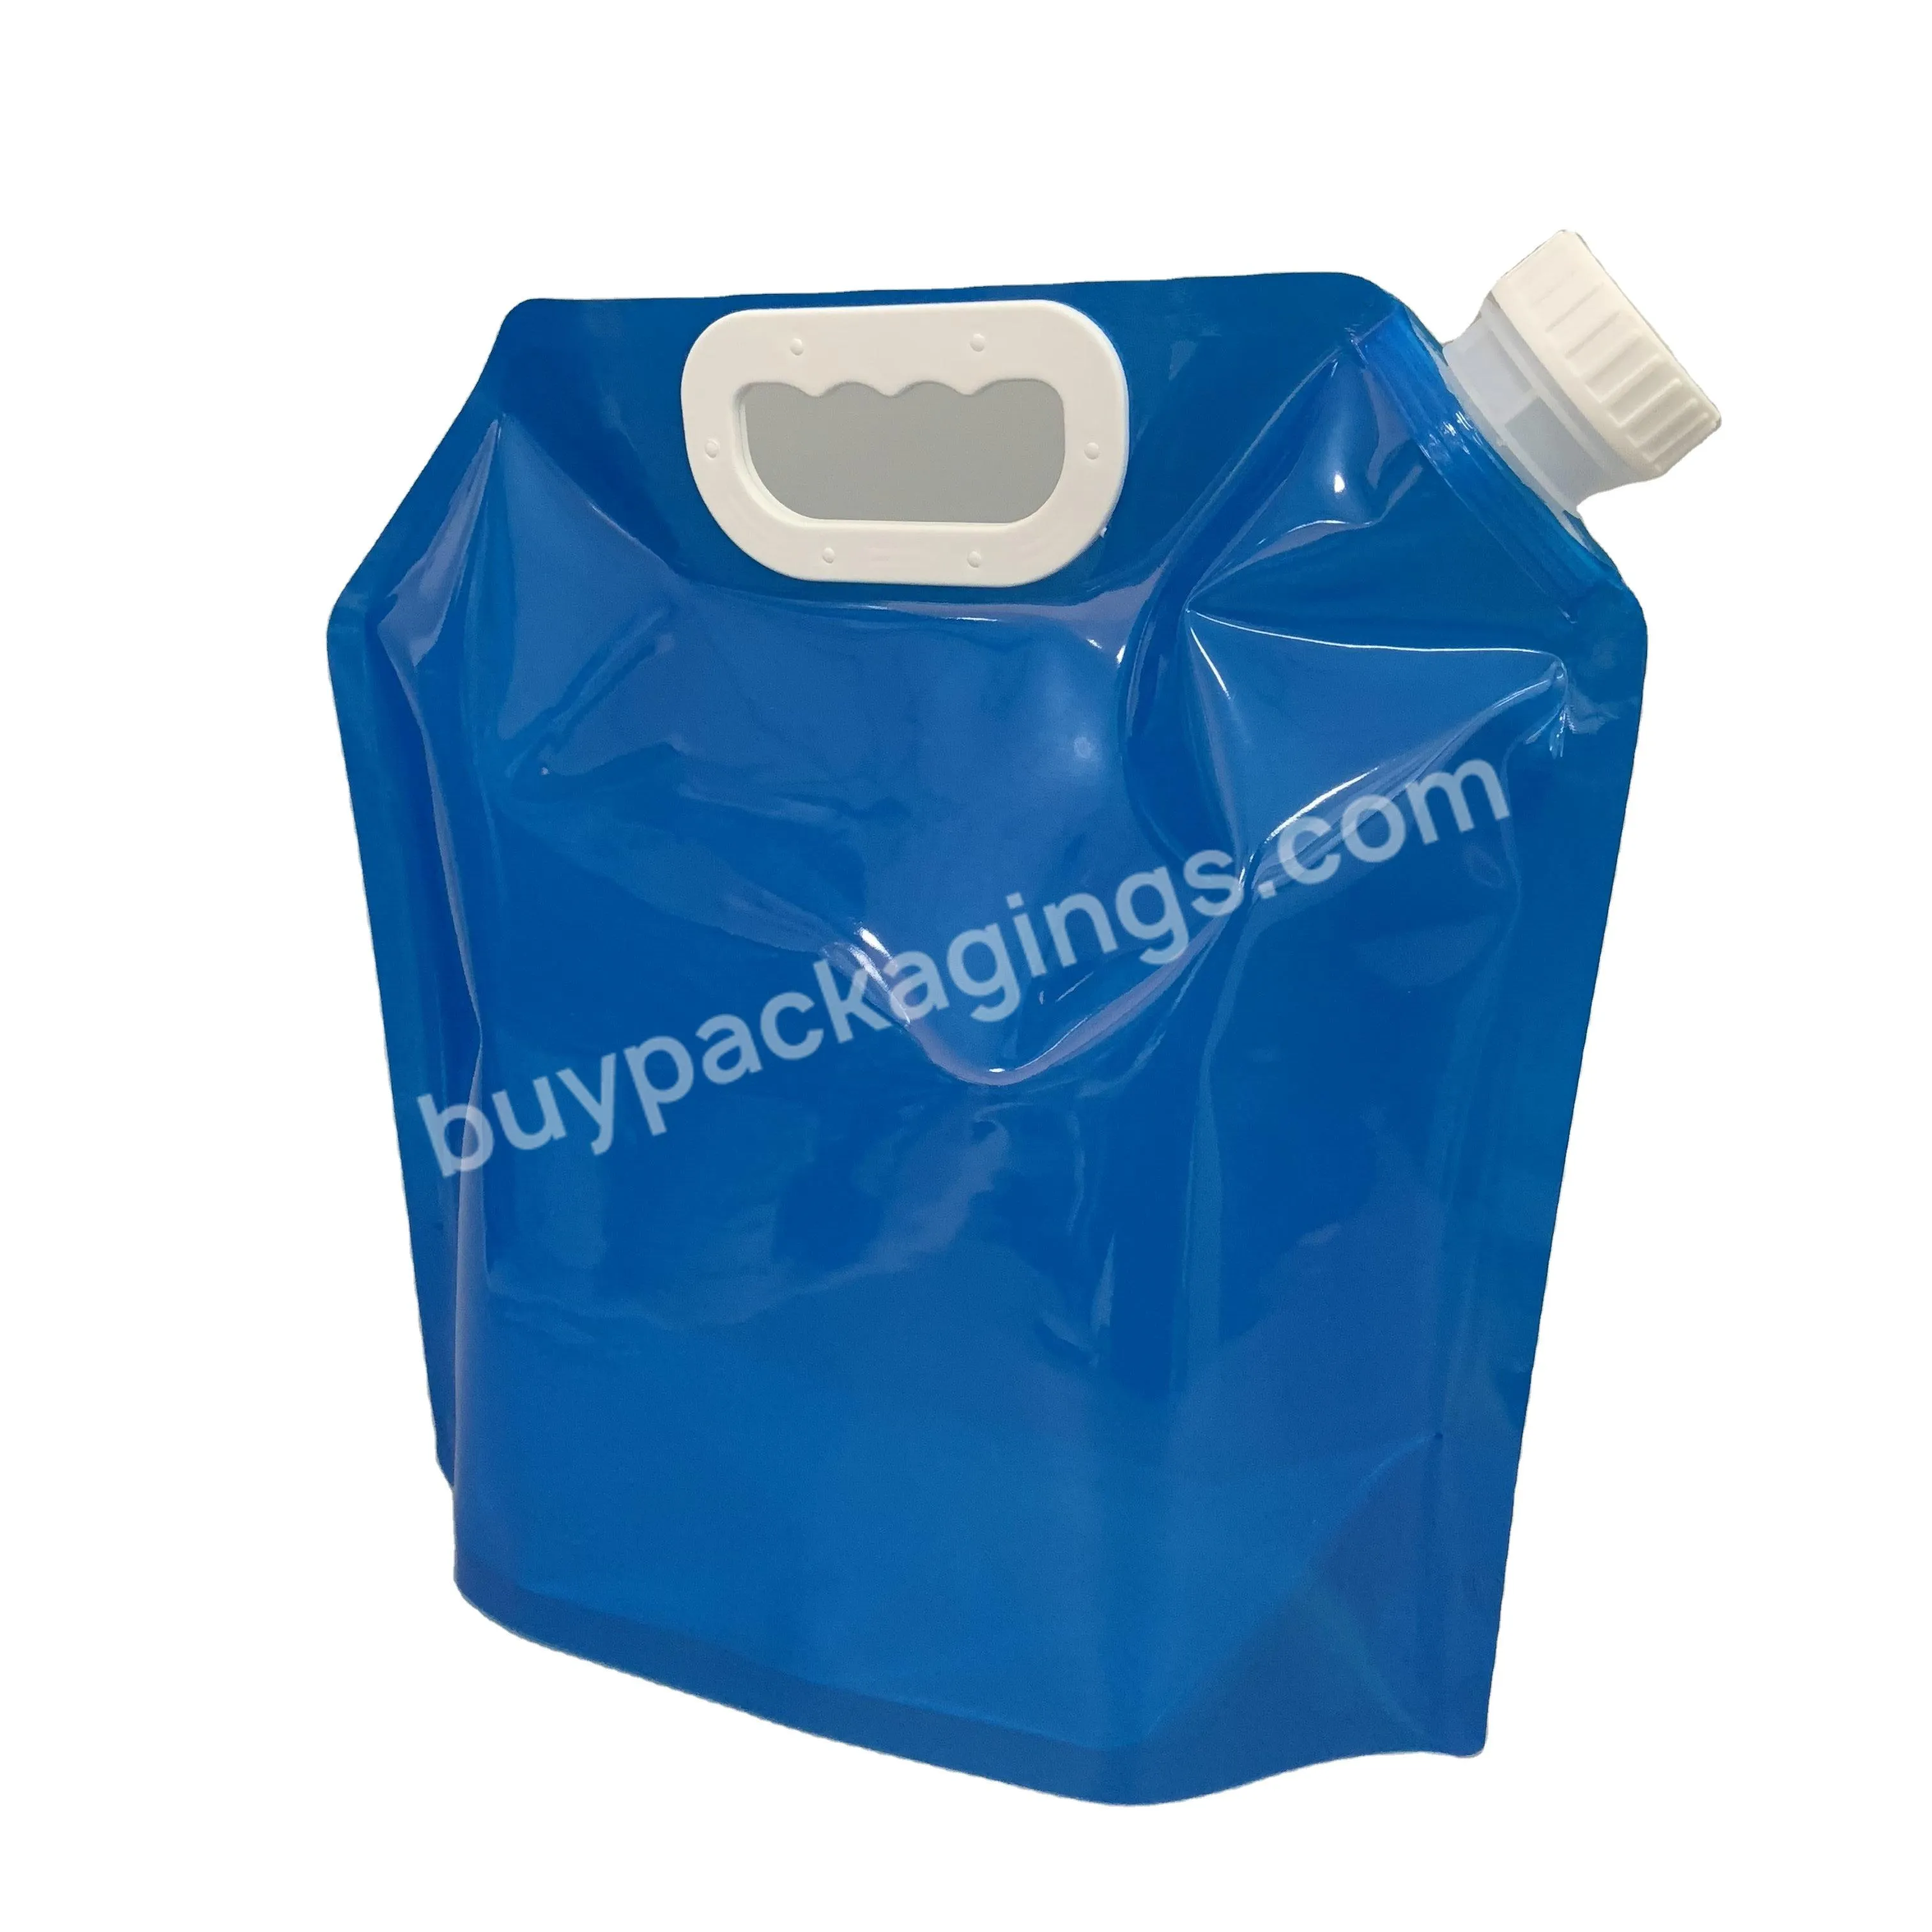 Drinking Blue Transparent Plastic Portable Reusable 5 Liter Water Bag Pouch - Buy Water Bag Pouch,Reusable 5 Liter Bag,Portable Water Bag.